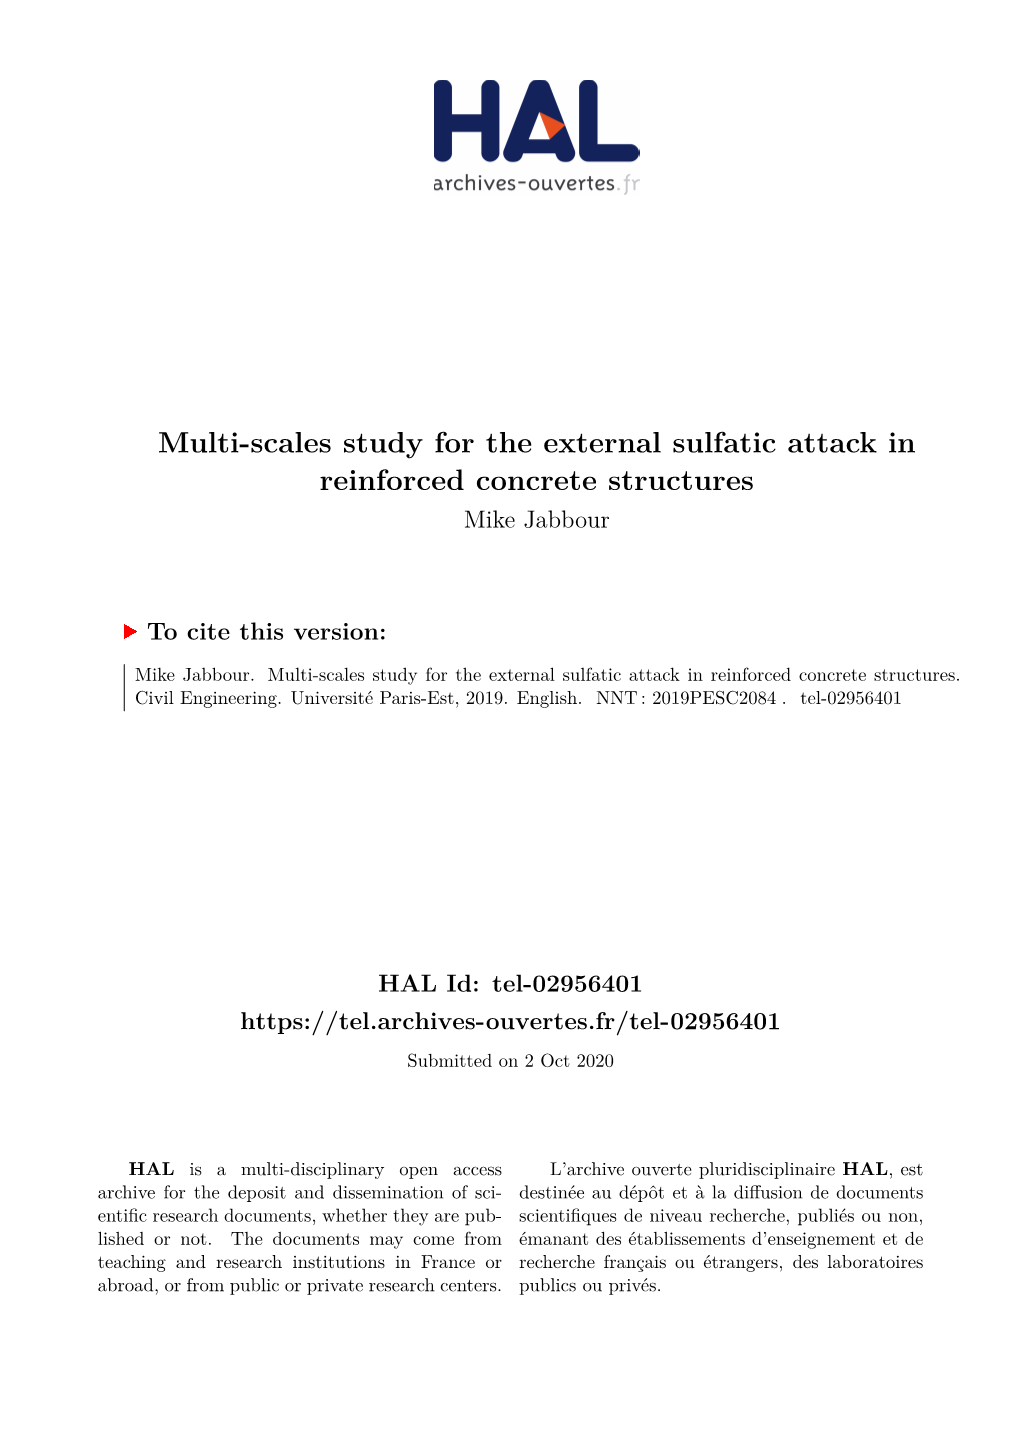 Multi-Scales Study for the External Sulfatic Attack in Reinforced Concrete Structures Mike Jabbour